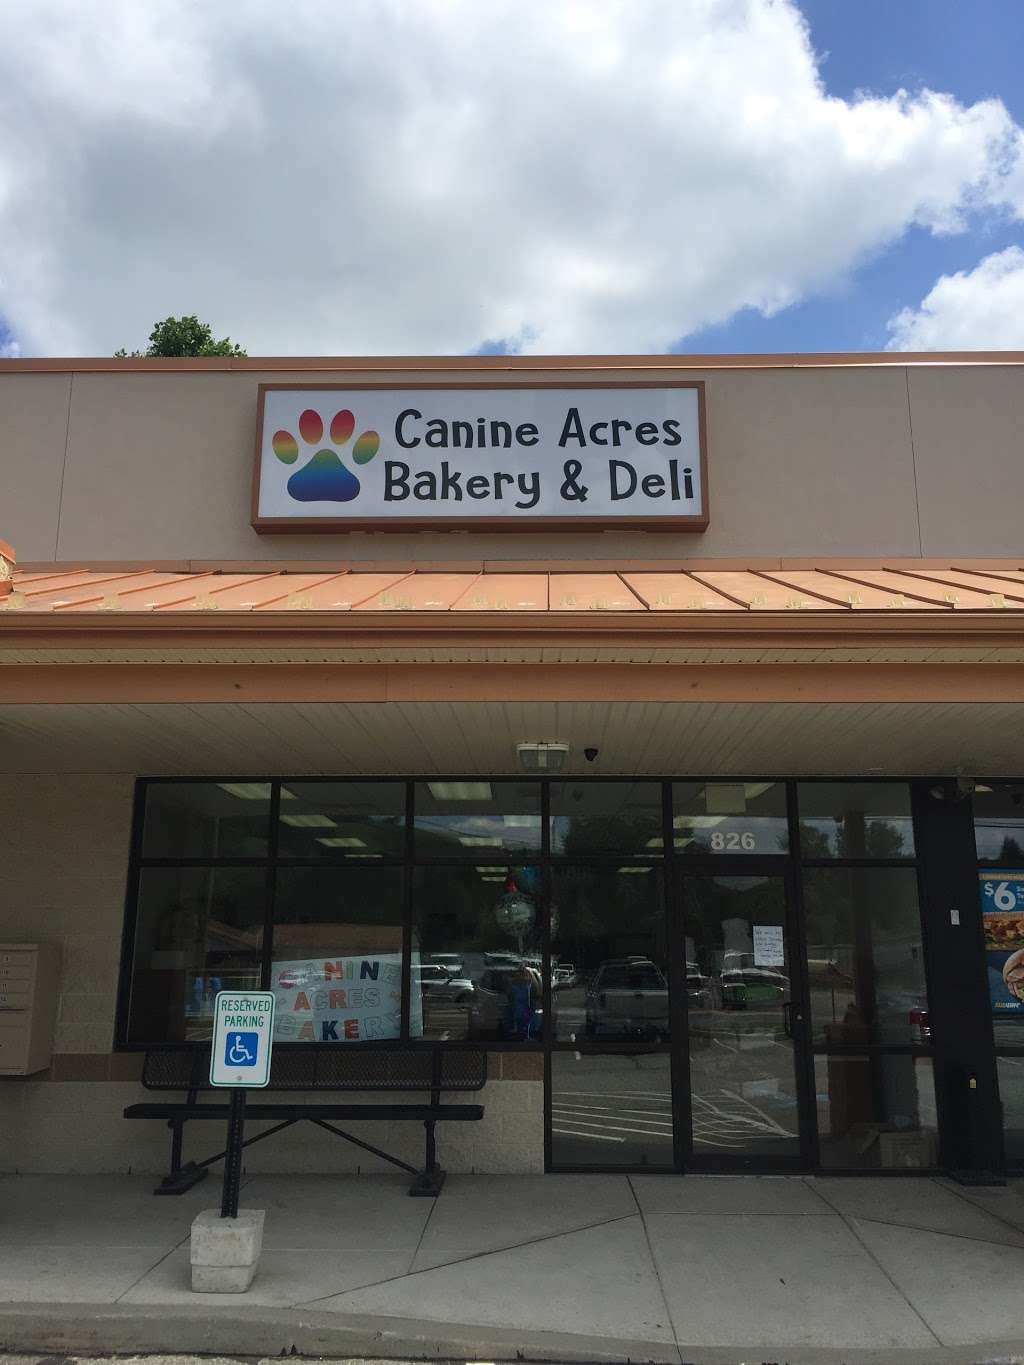 Canine Acres Bakery and Deli | 826 RT 100 North, Bechtelsville, PA 19505 | Phone: (484) 415-5856